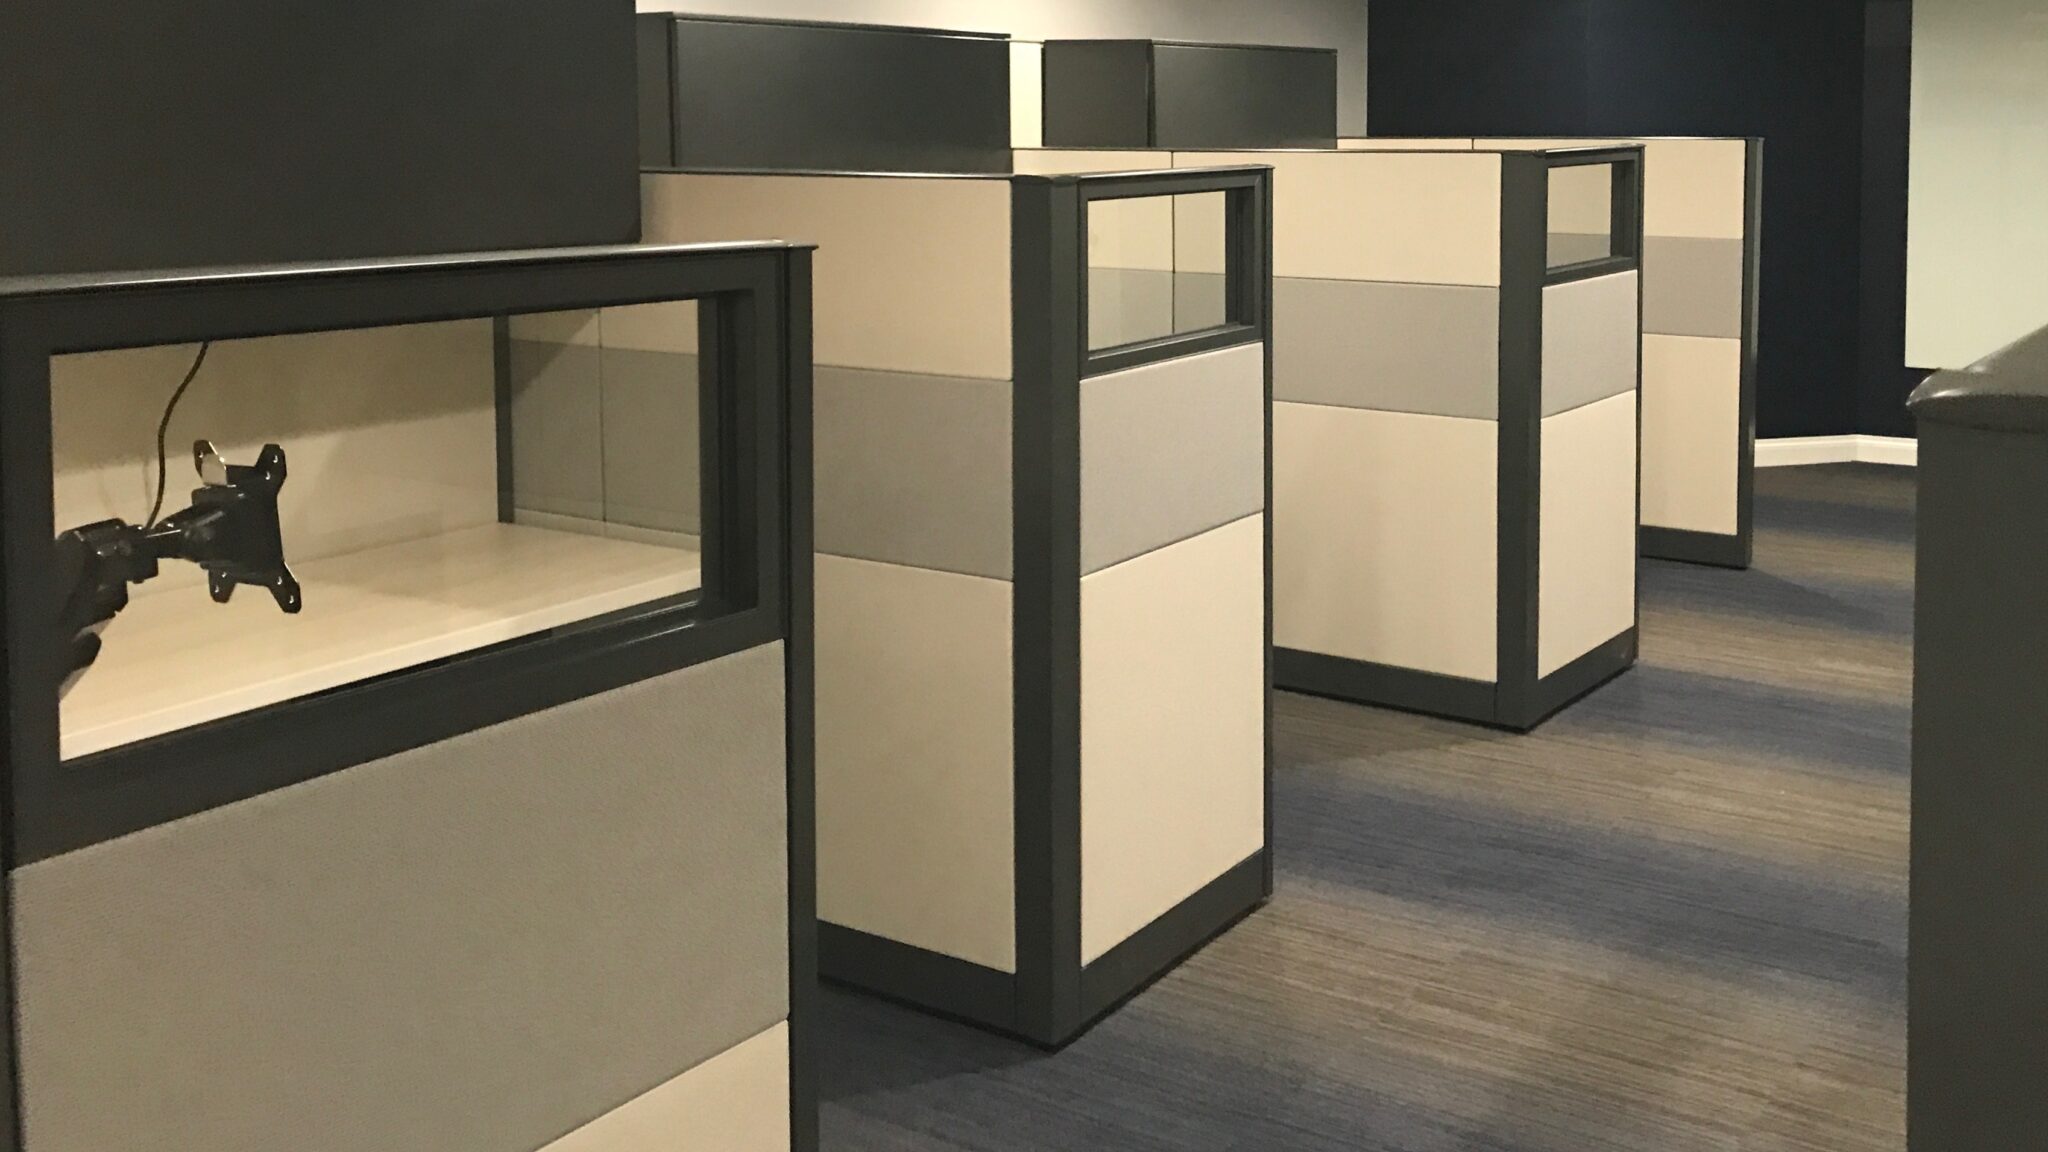 Image of office cubicle walls